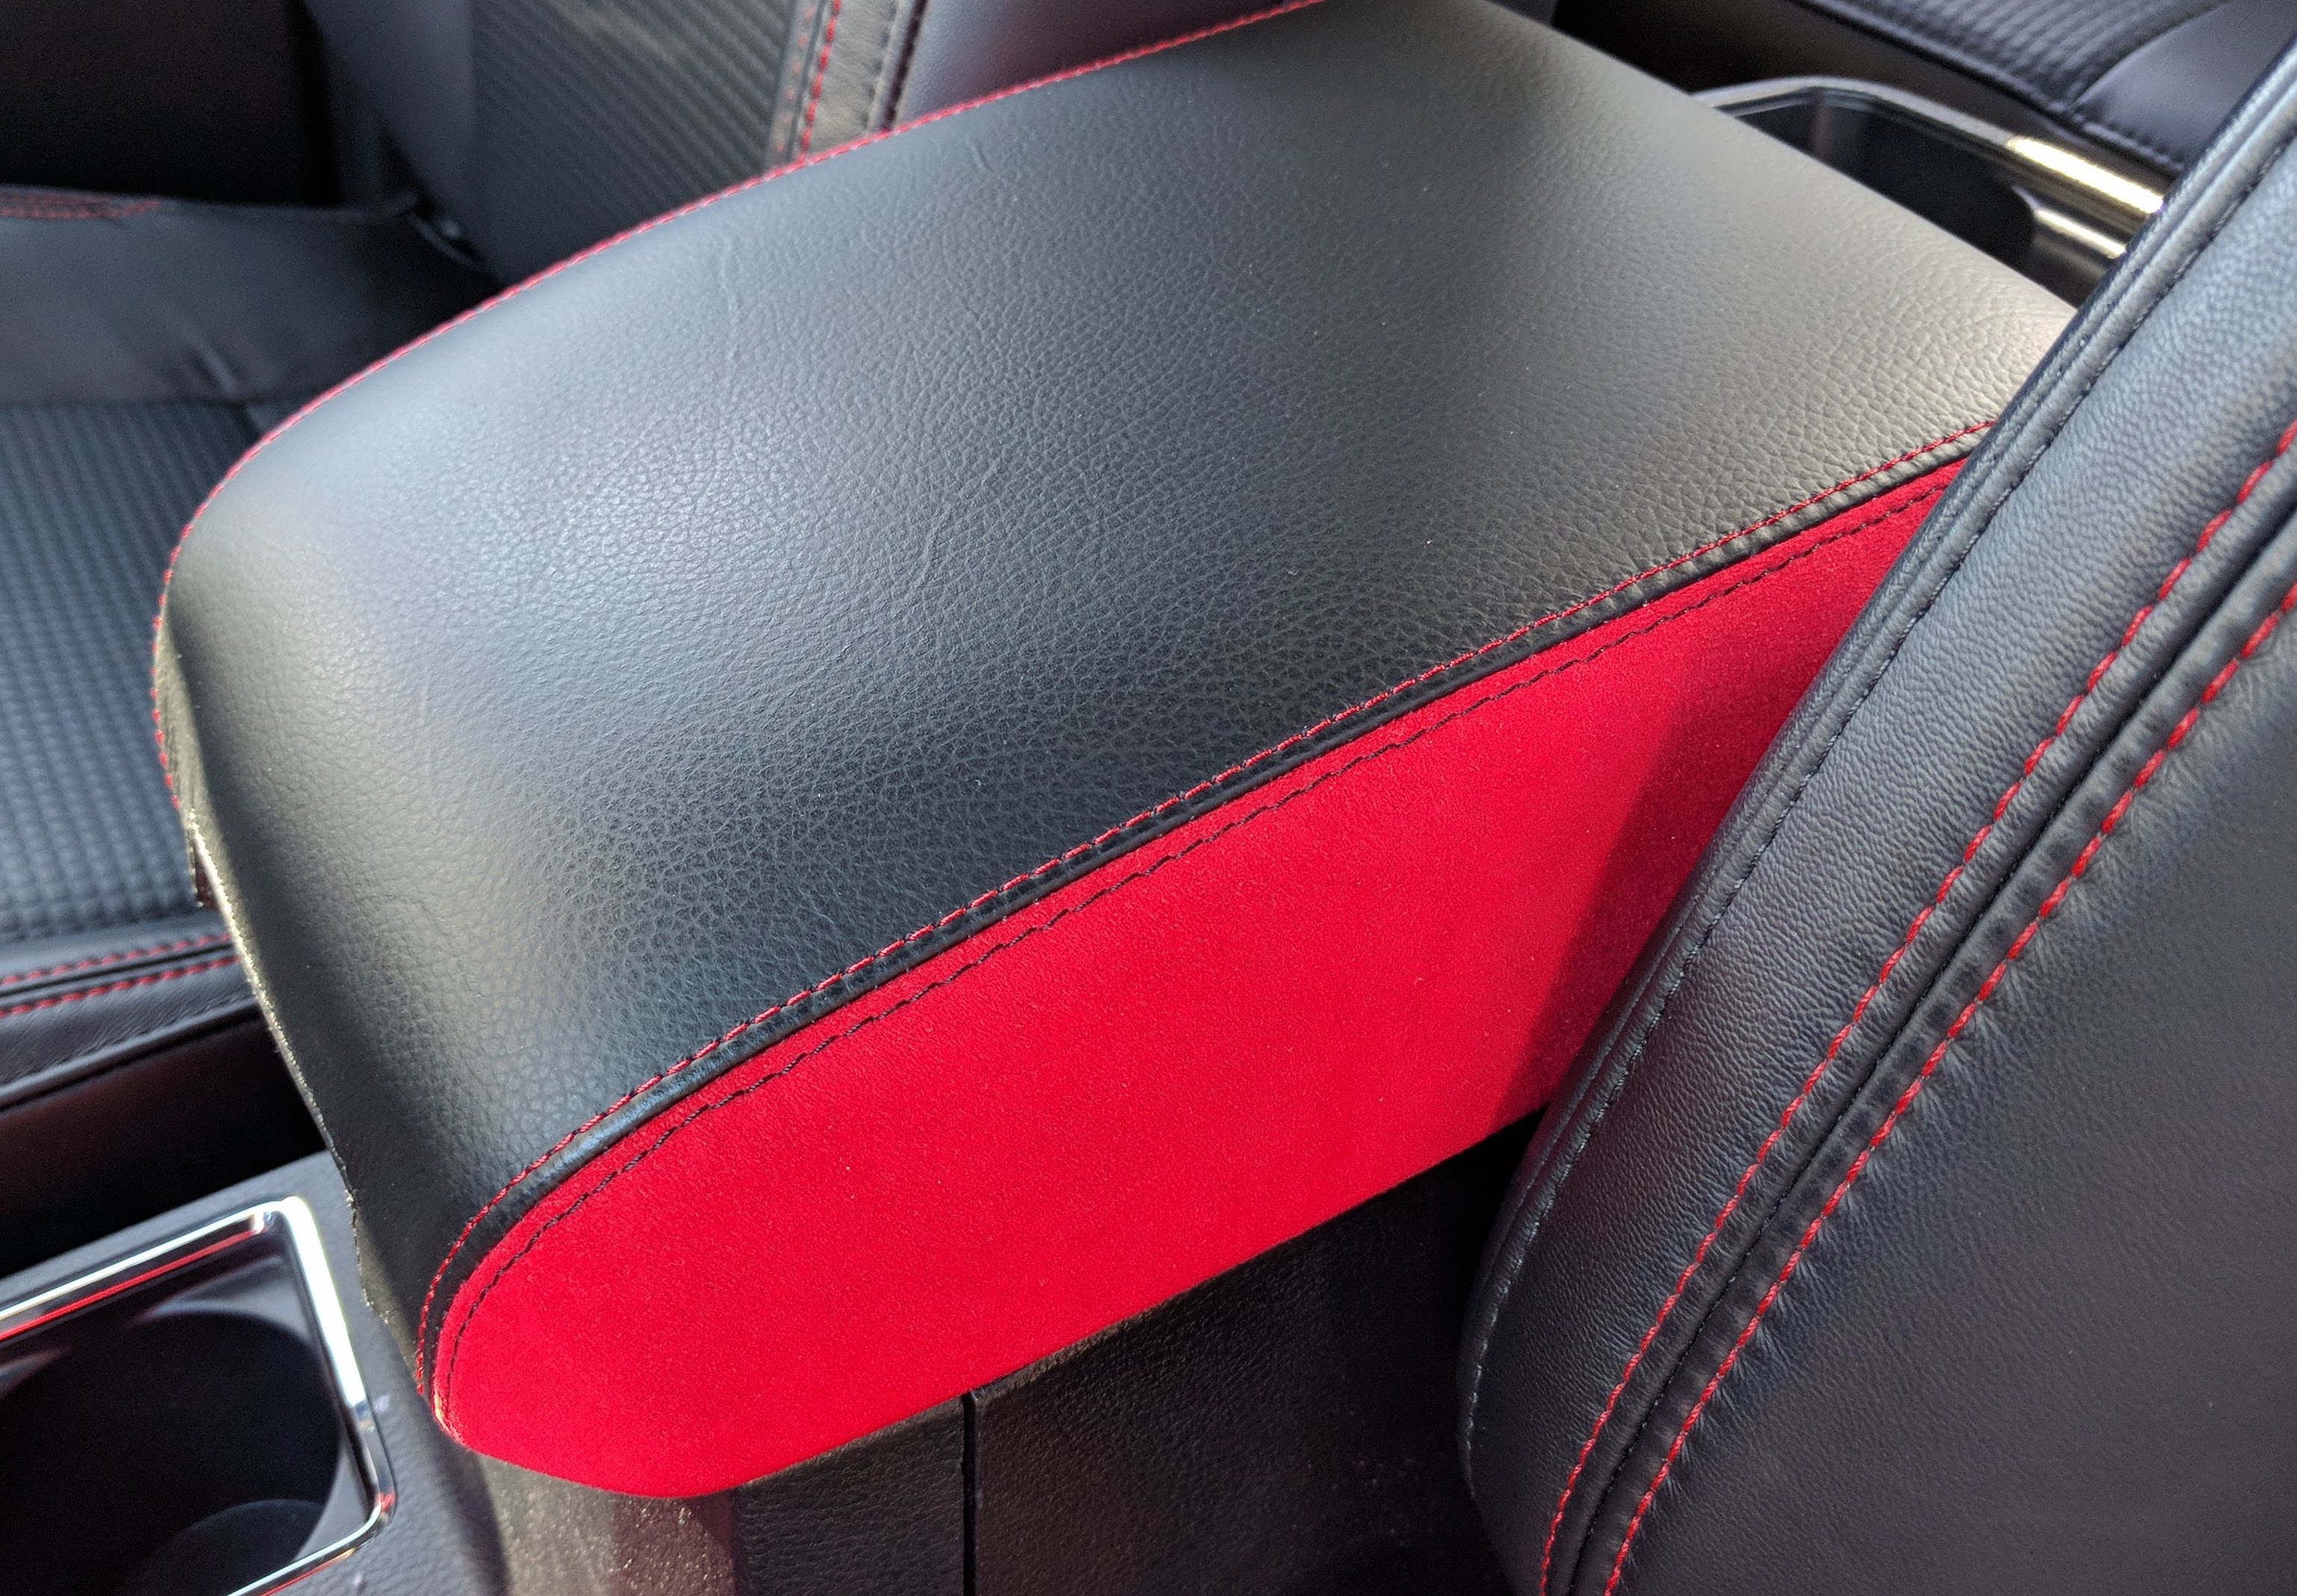 RED STITCH ARMREST COVER FITS MAZDA 6 2003-2008 BLACK REAL LEATHER